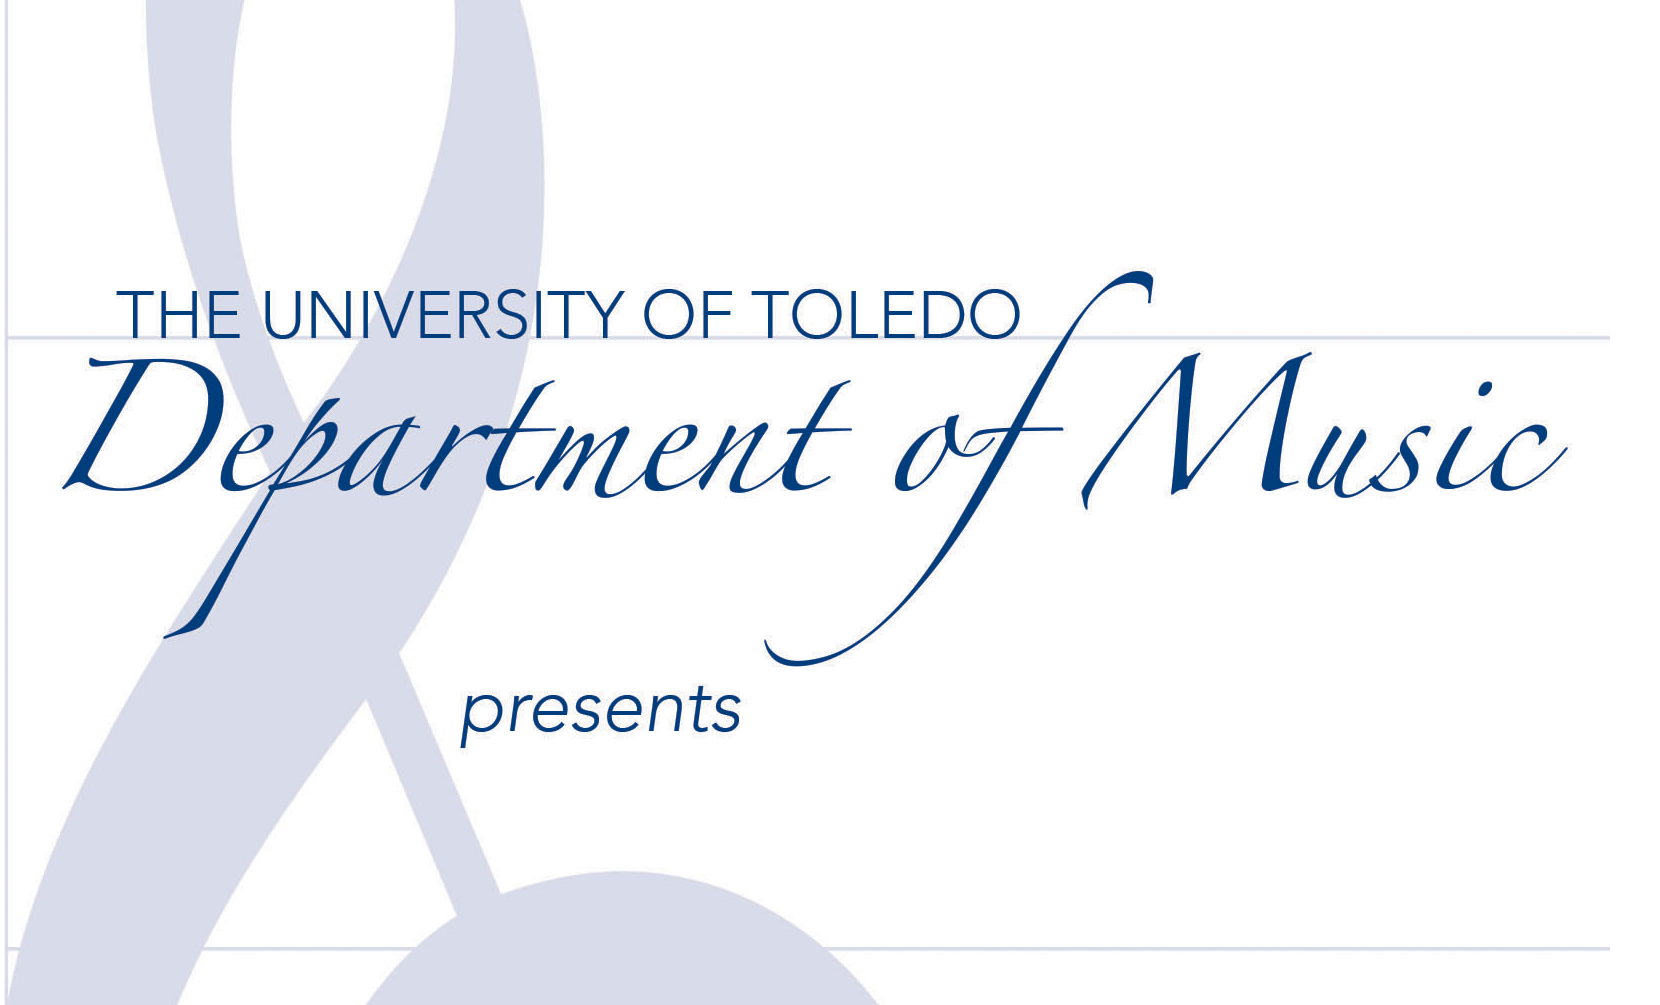 Partial image of a treble clef with the text The University of Toledo Department of Music presents